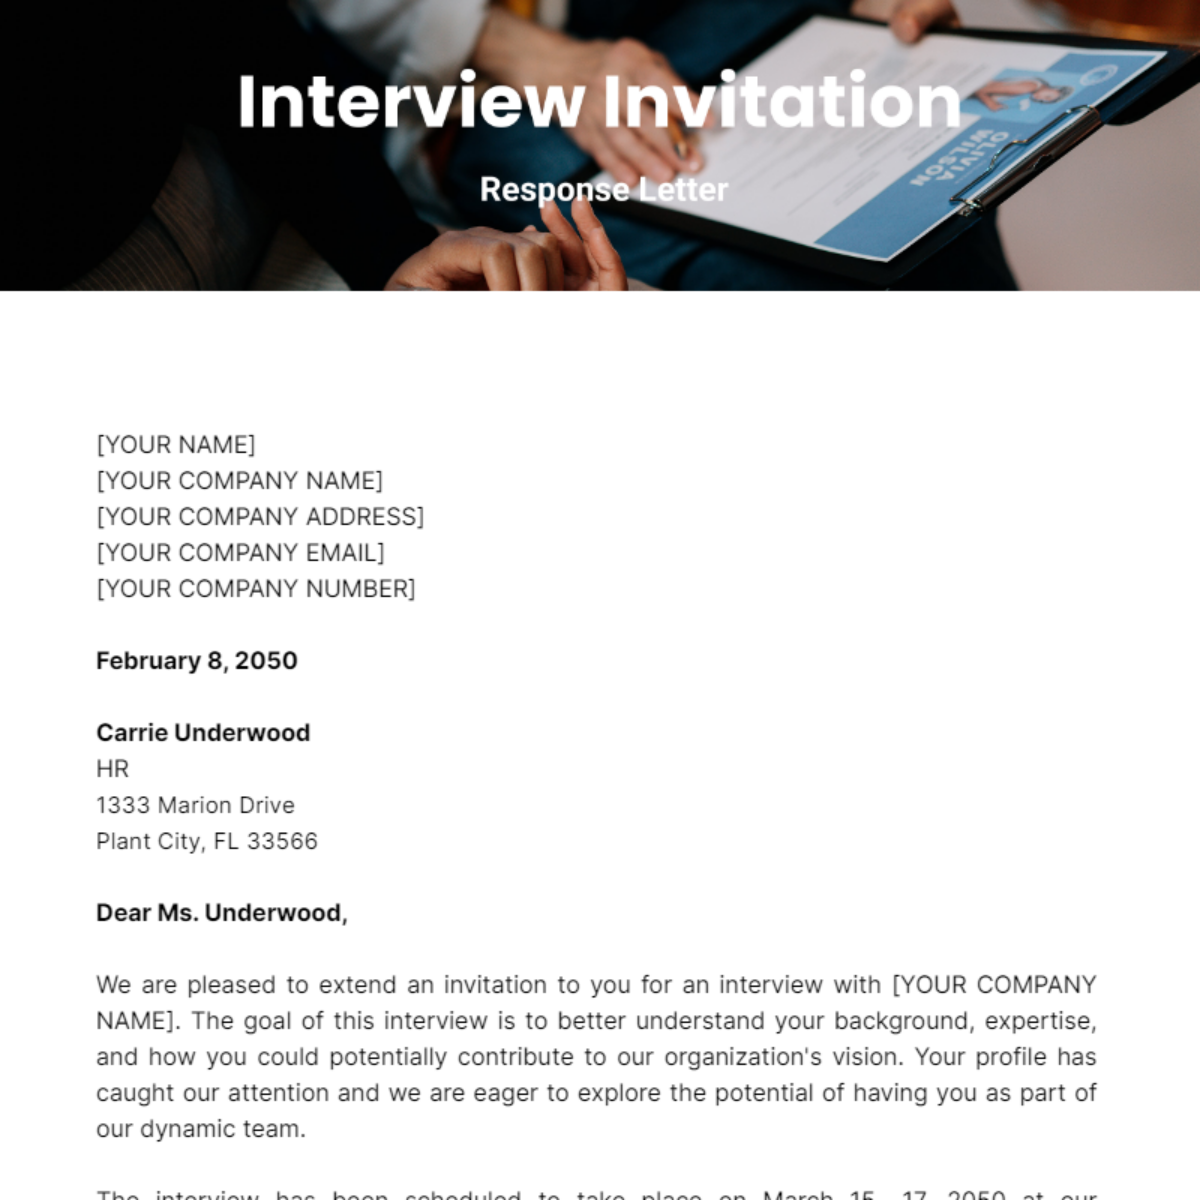 Interview Invitation Response Letter Template